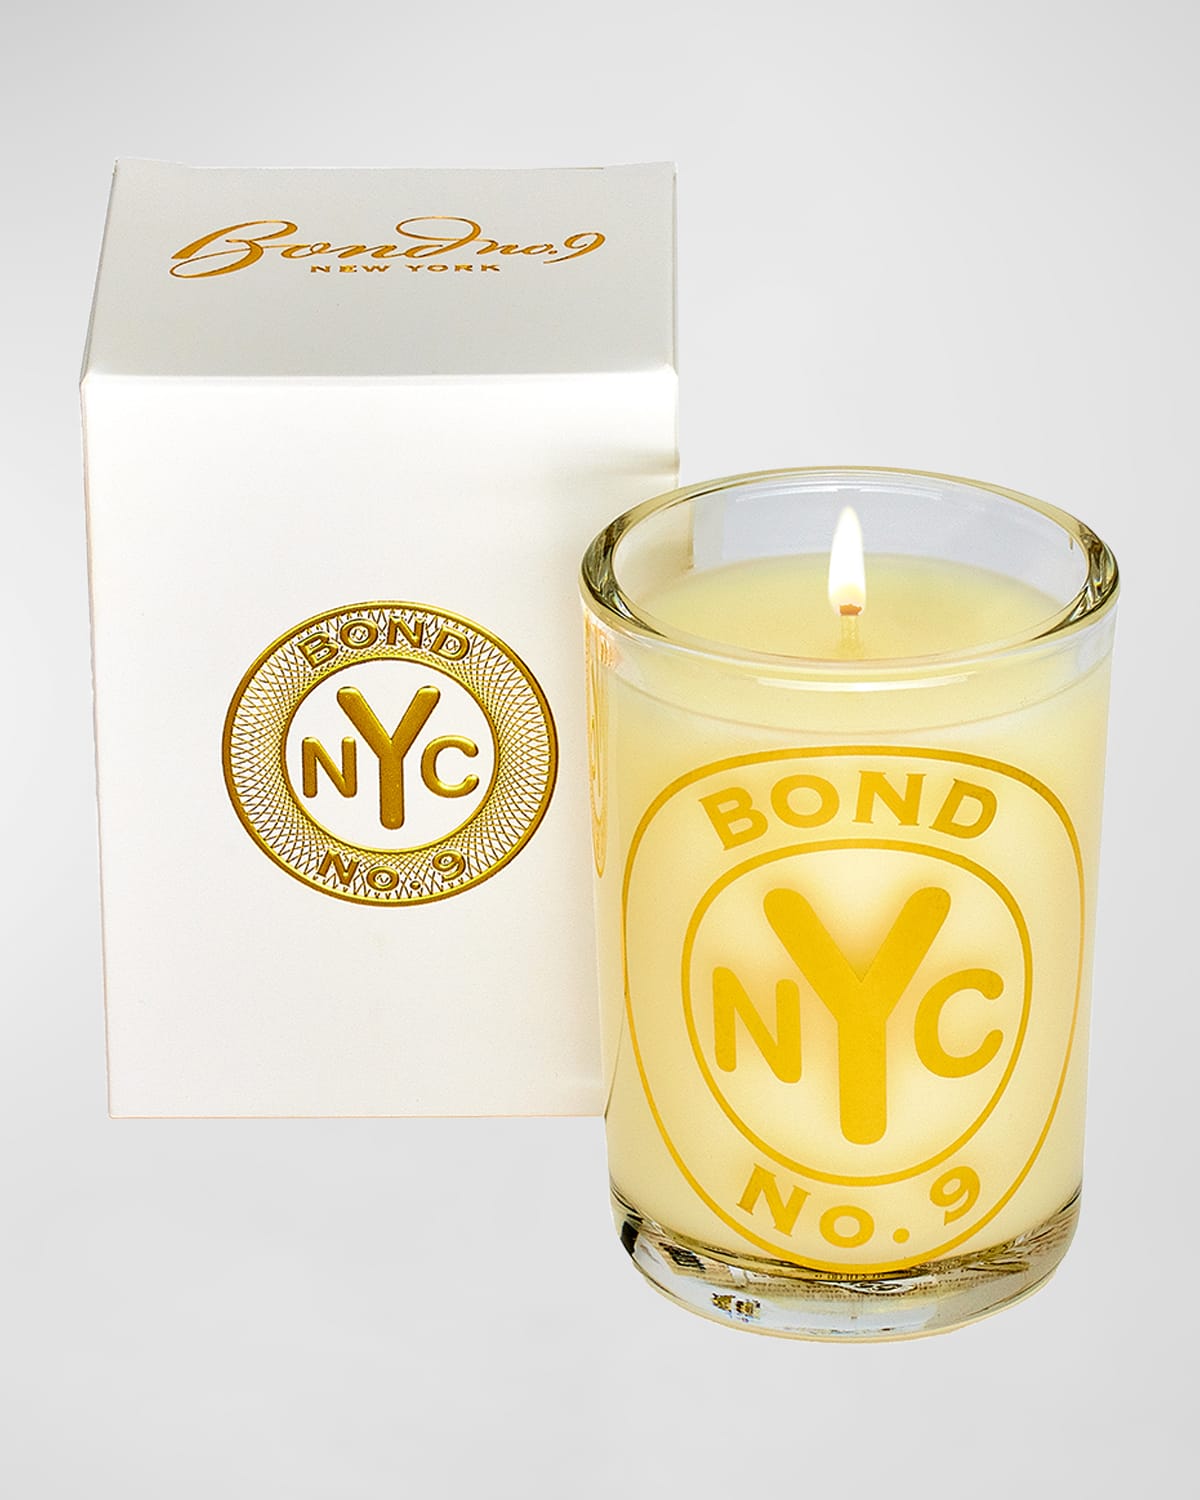 Bond No.9 New York Bond No. 9 Perfume Scented Candle Refill In Yellow